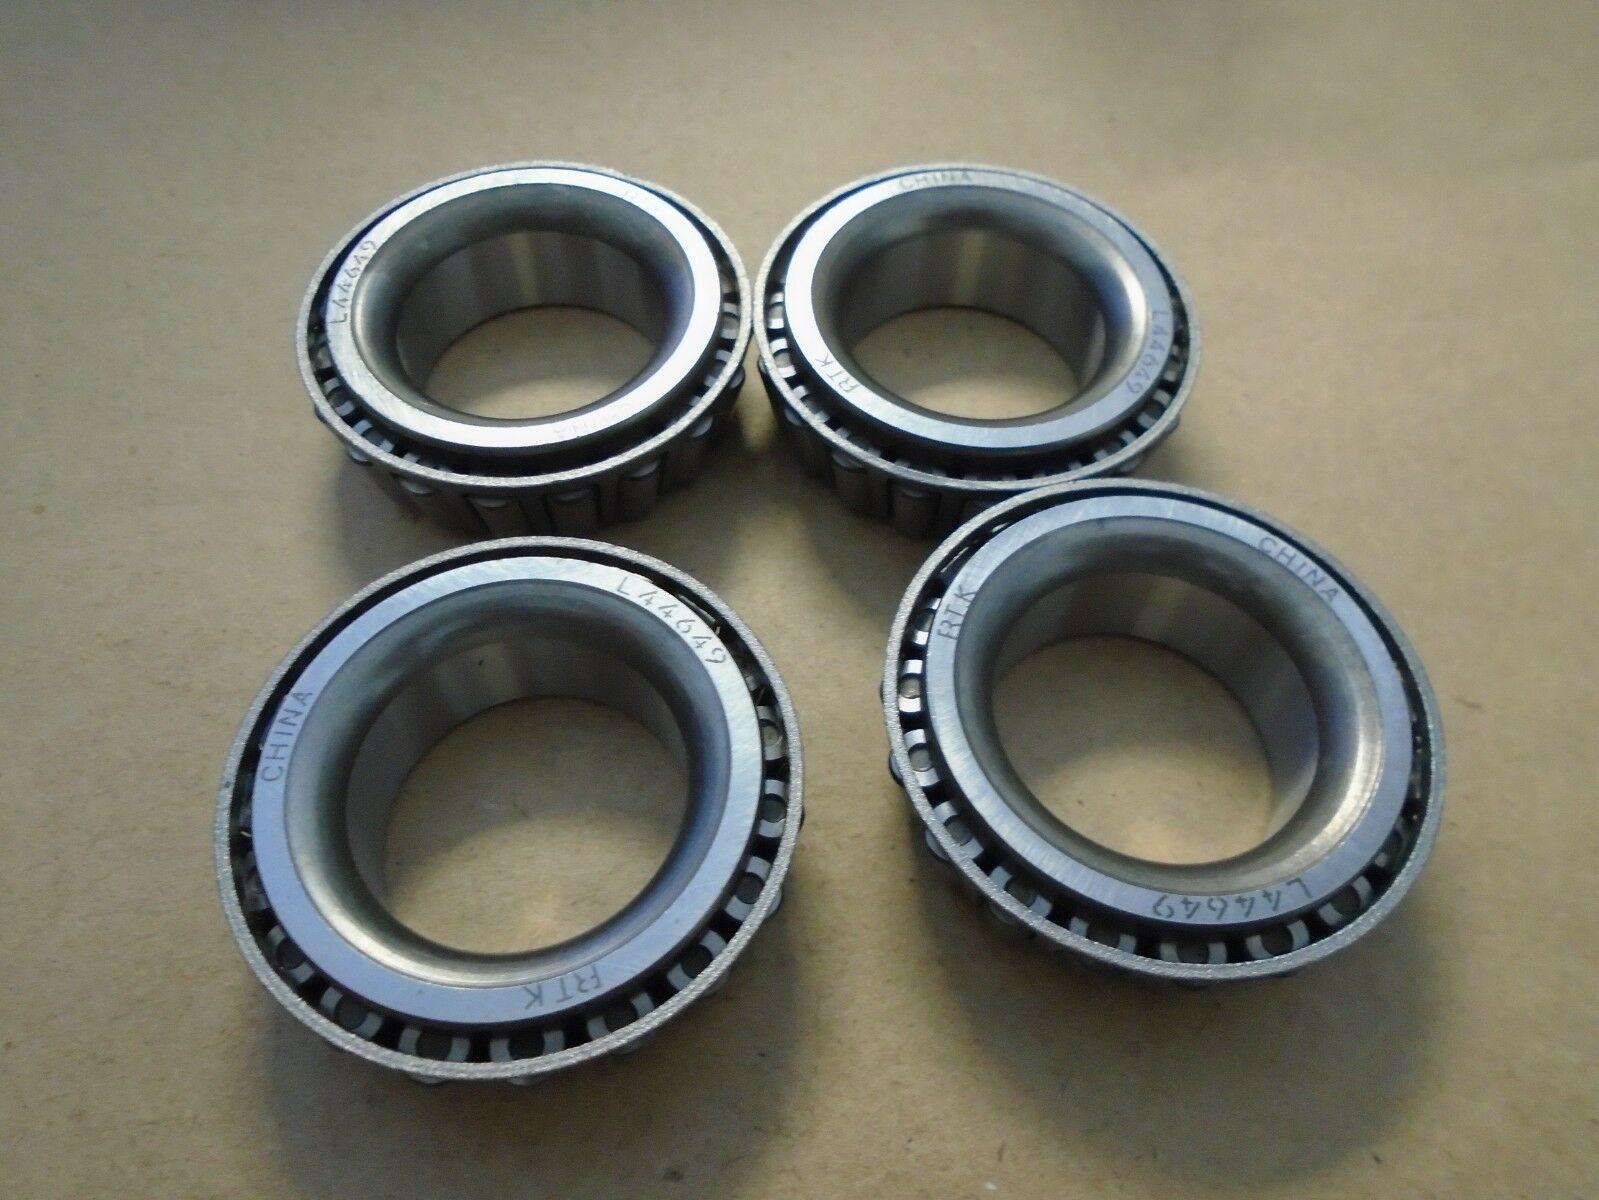 Tapered Roller Bearing 25572/25520 25577/25521 25580/25522 25581/25523 25582/25523 25590/25523 25877/25820 25878/25821 25880/25821 26877/26820 26882/26823 27690/27620